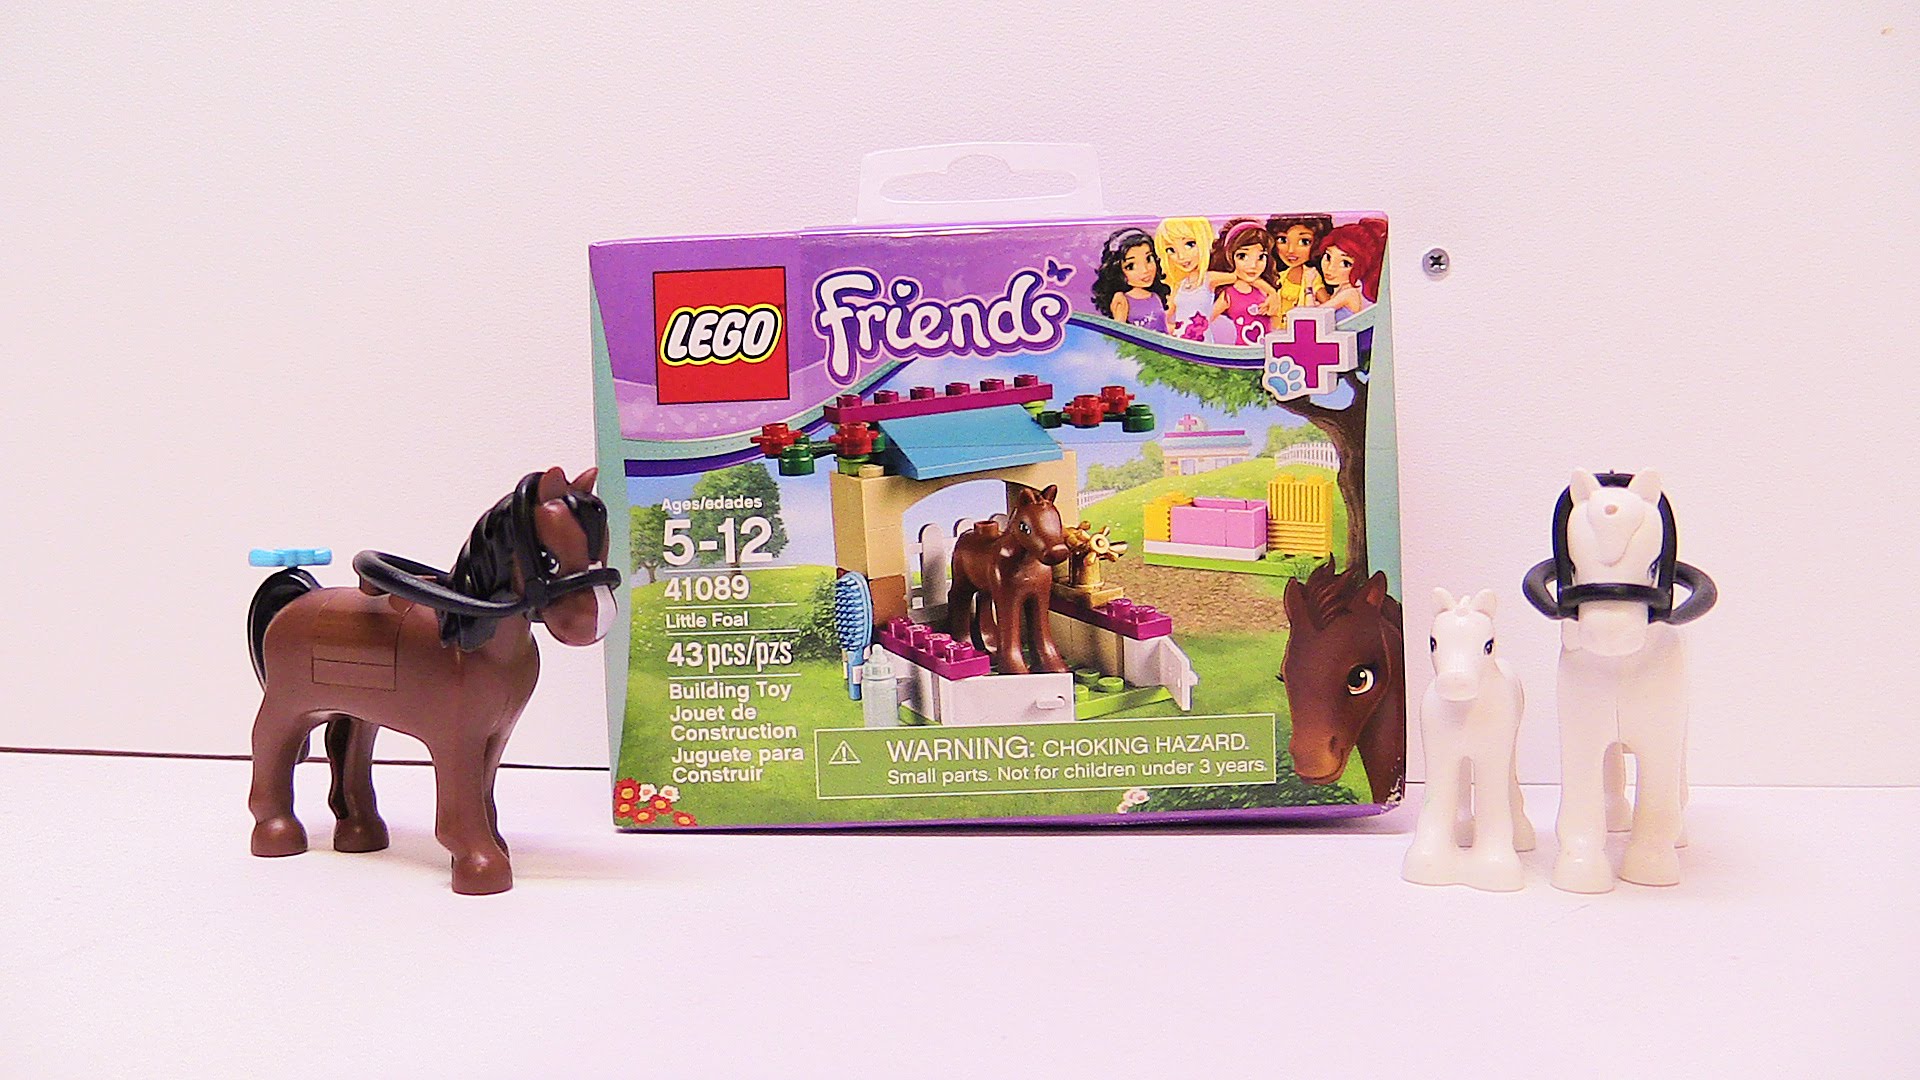 LEGO Friends Little Foal 41089 Un-boxing, Build and Play - YouTube